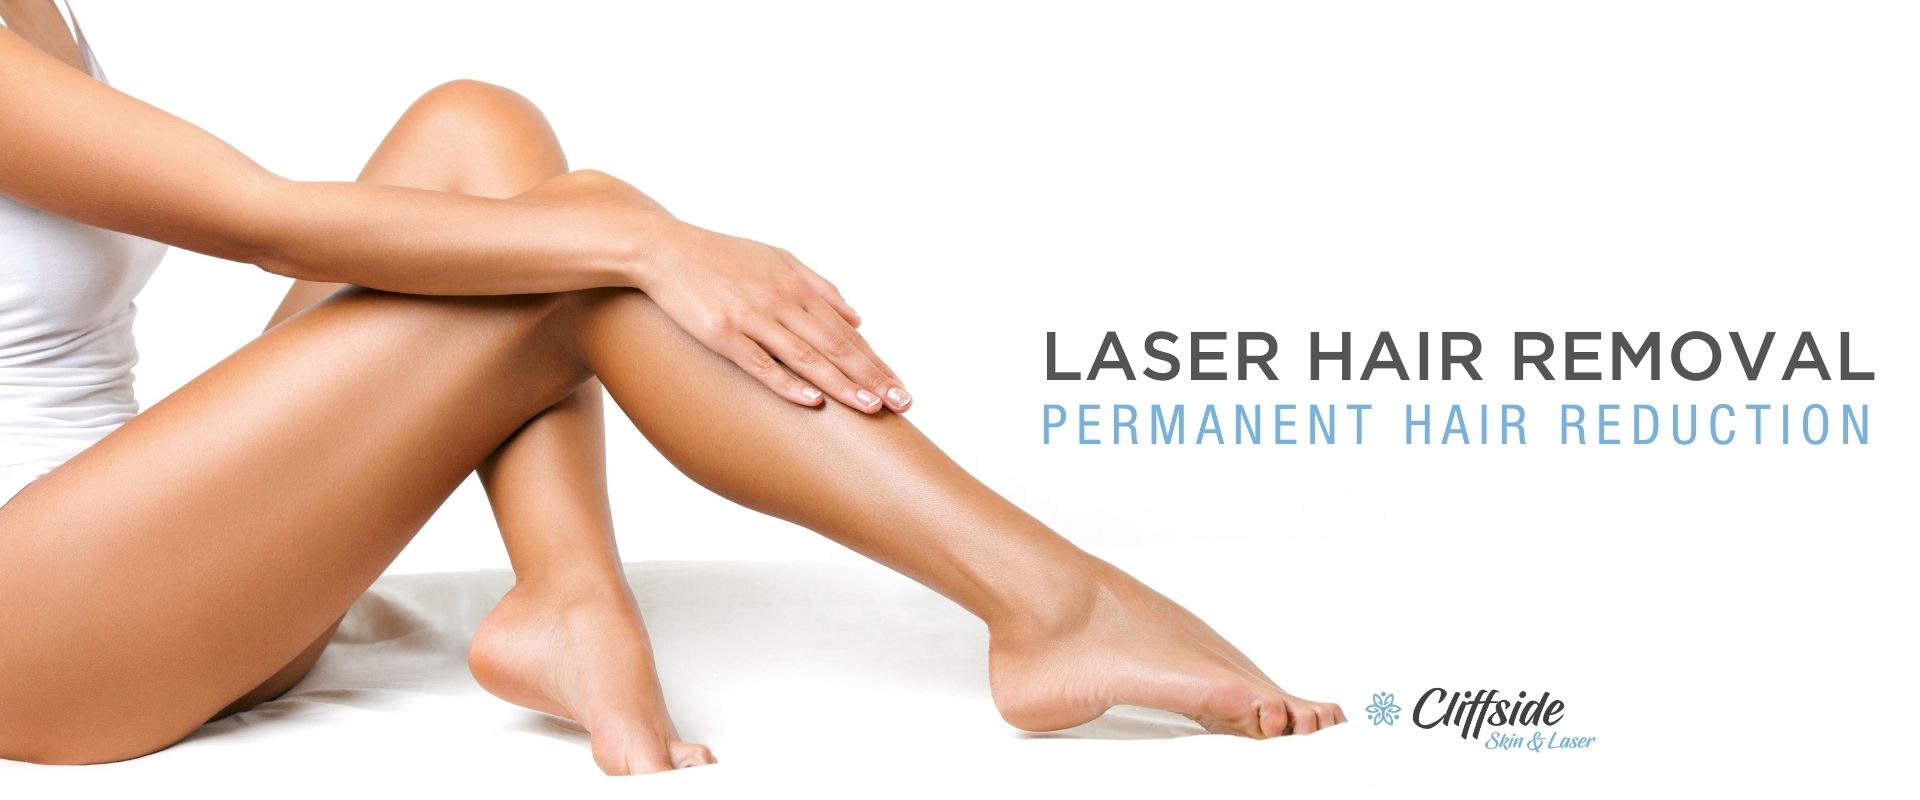 Laser Hair Removal | Remove Unwanted Hair | Permanent Hair Reduction